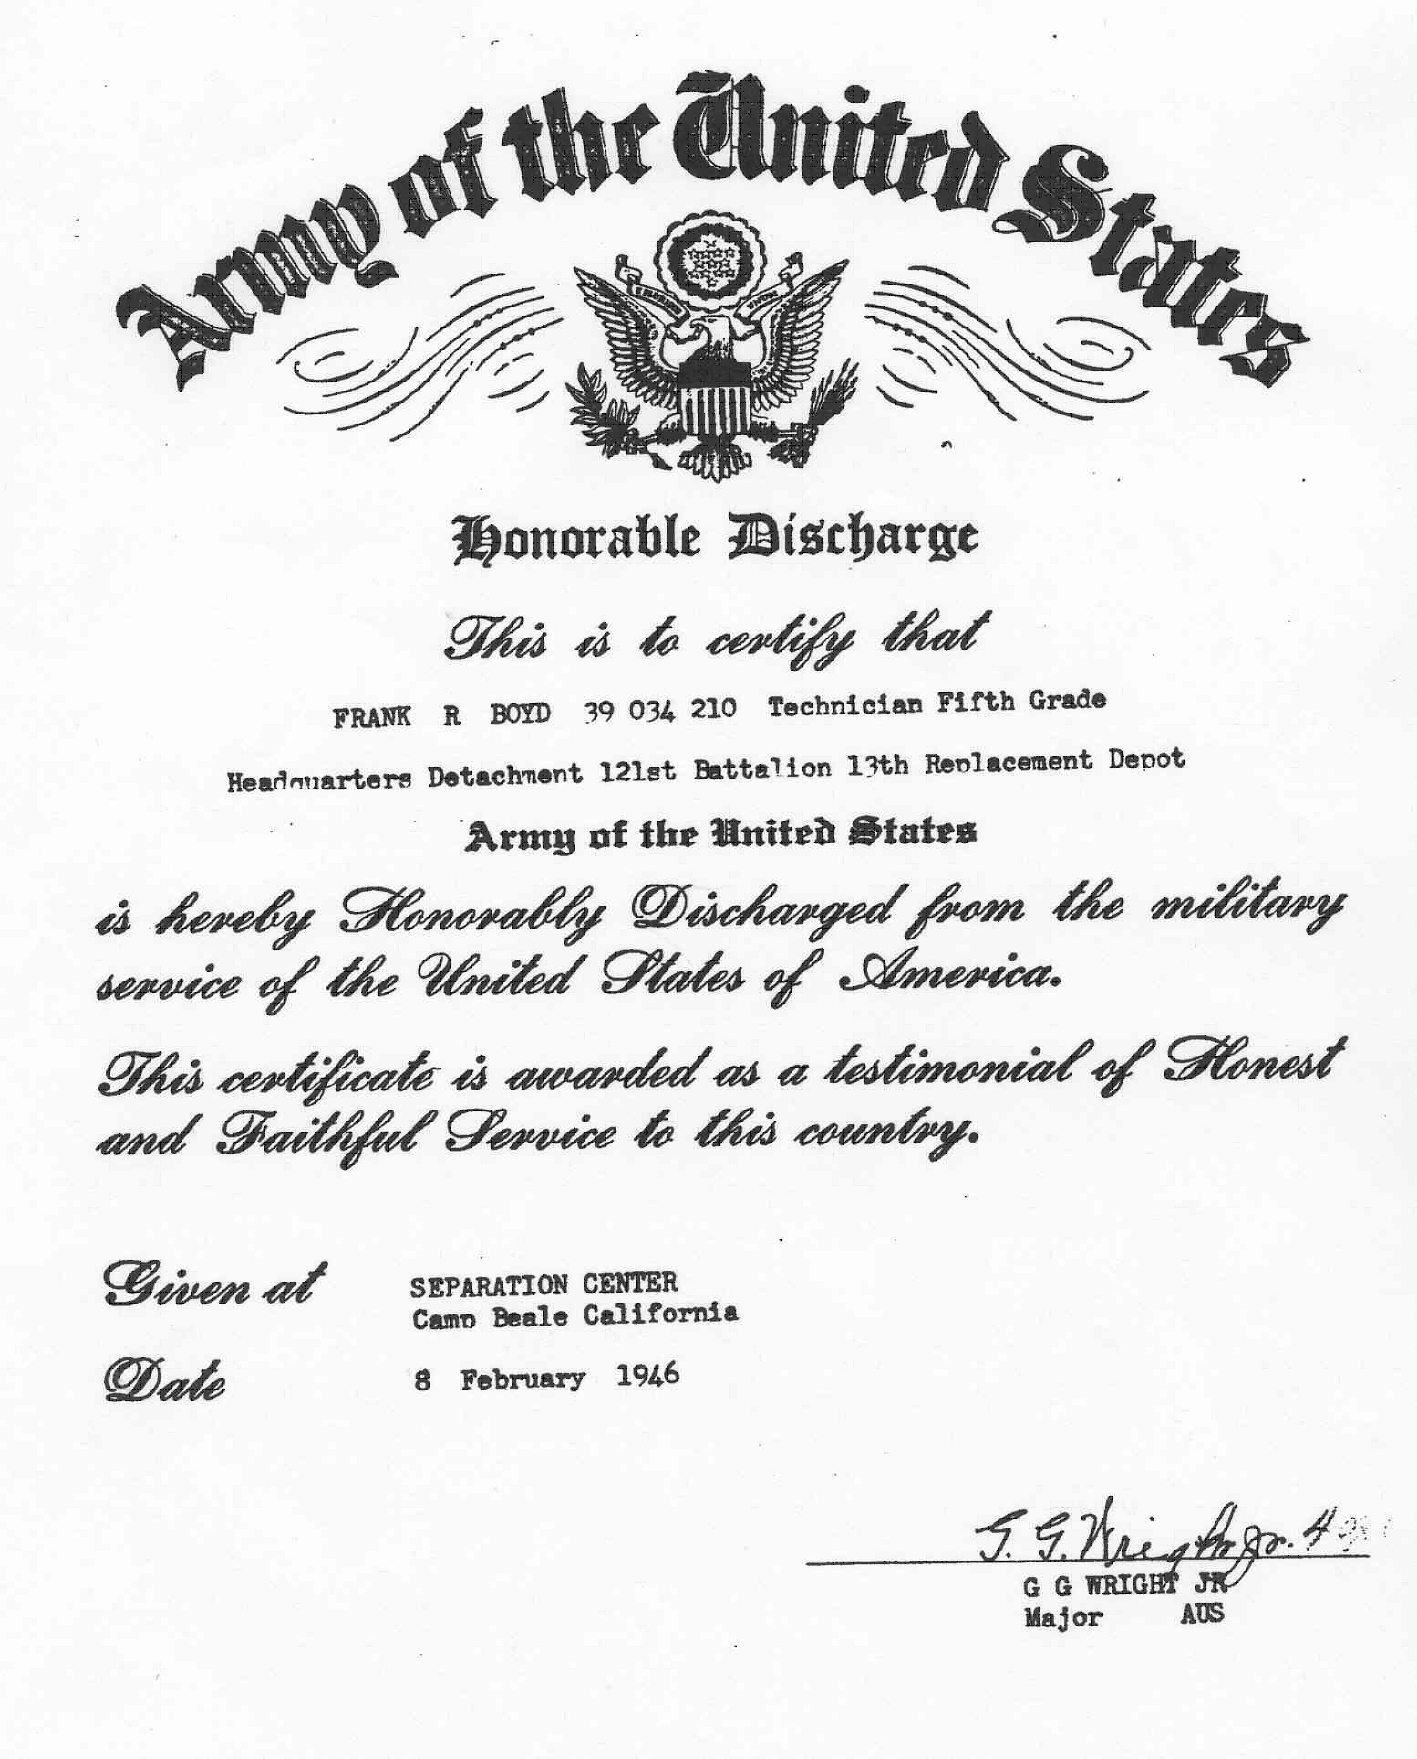 Honorable discharge certificate for Frank R. Boyd